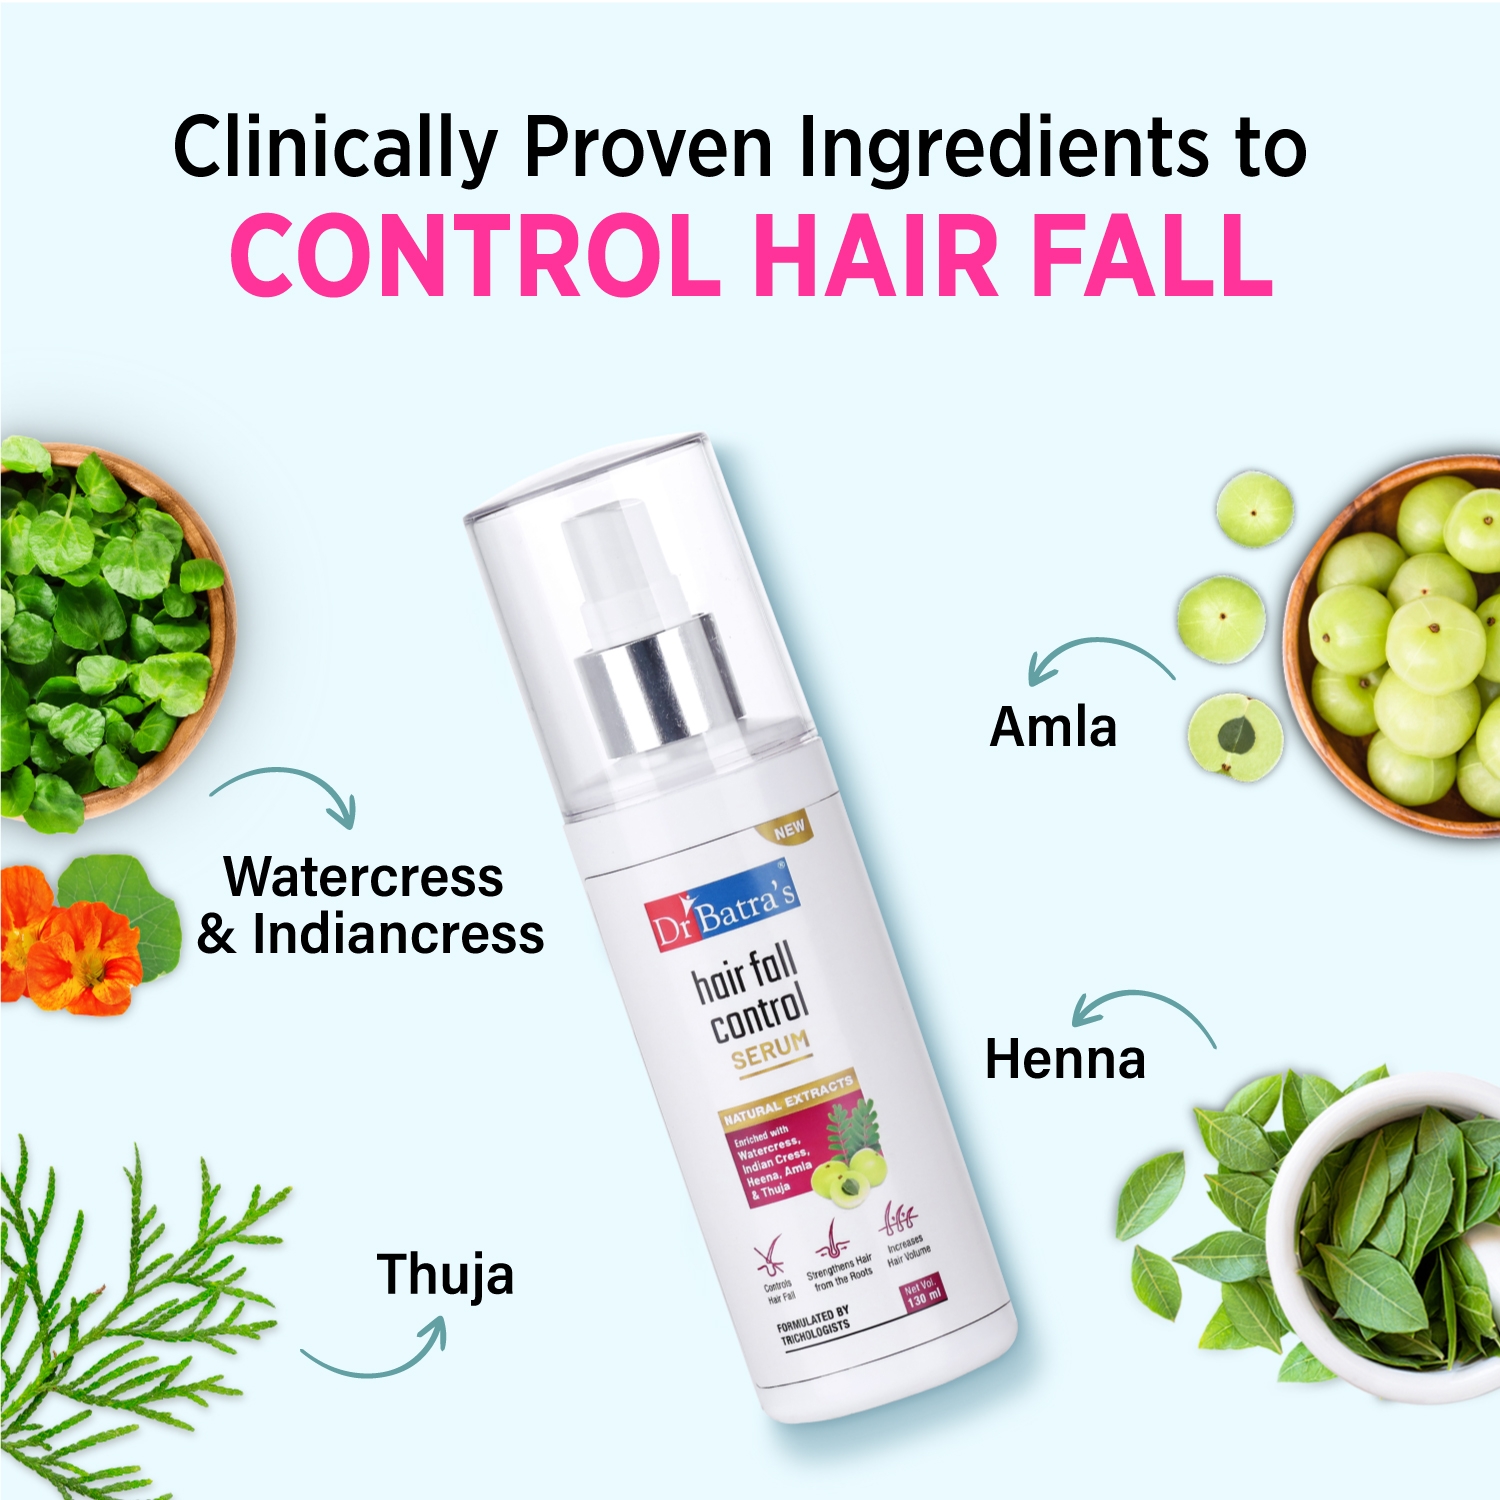 Dr Batra's | Dr Batra's Hair Fall Control Serum Enriched With Watercress, Indian Cress Extract, Heena, Amla Extract & Thuja - 130 ml 2